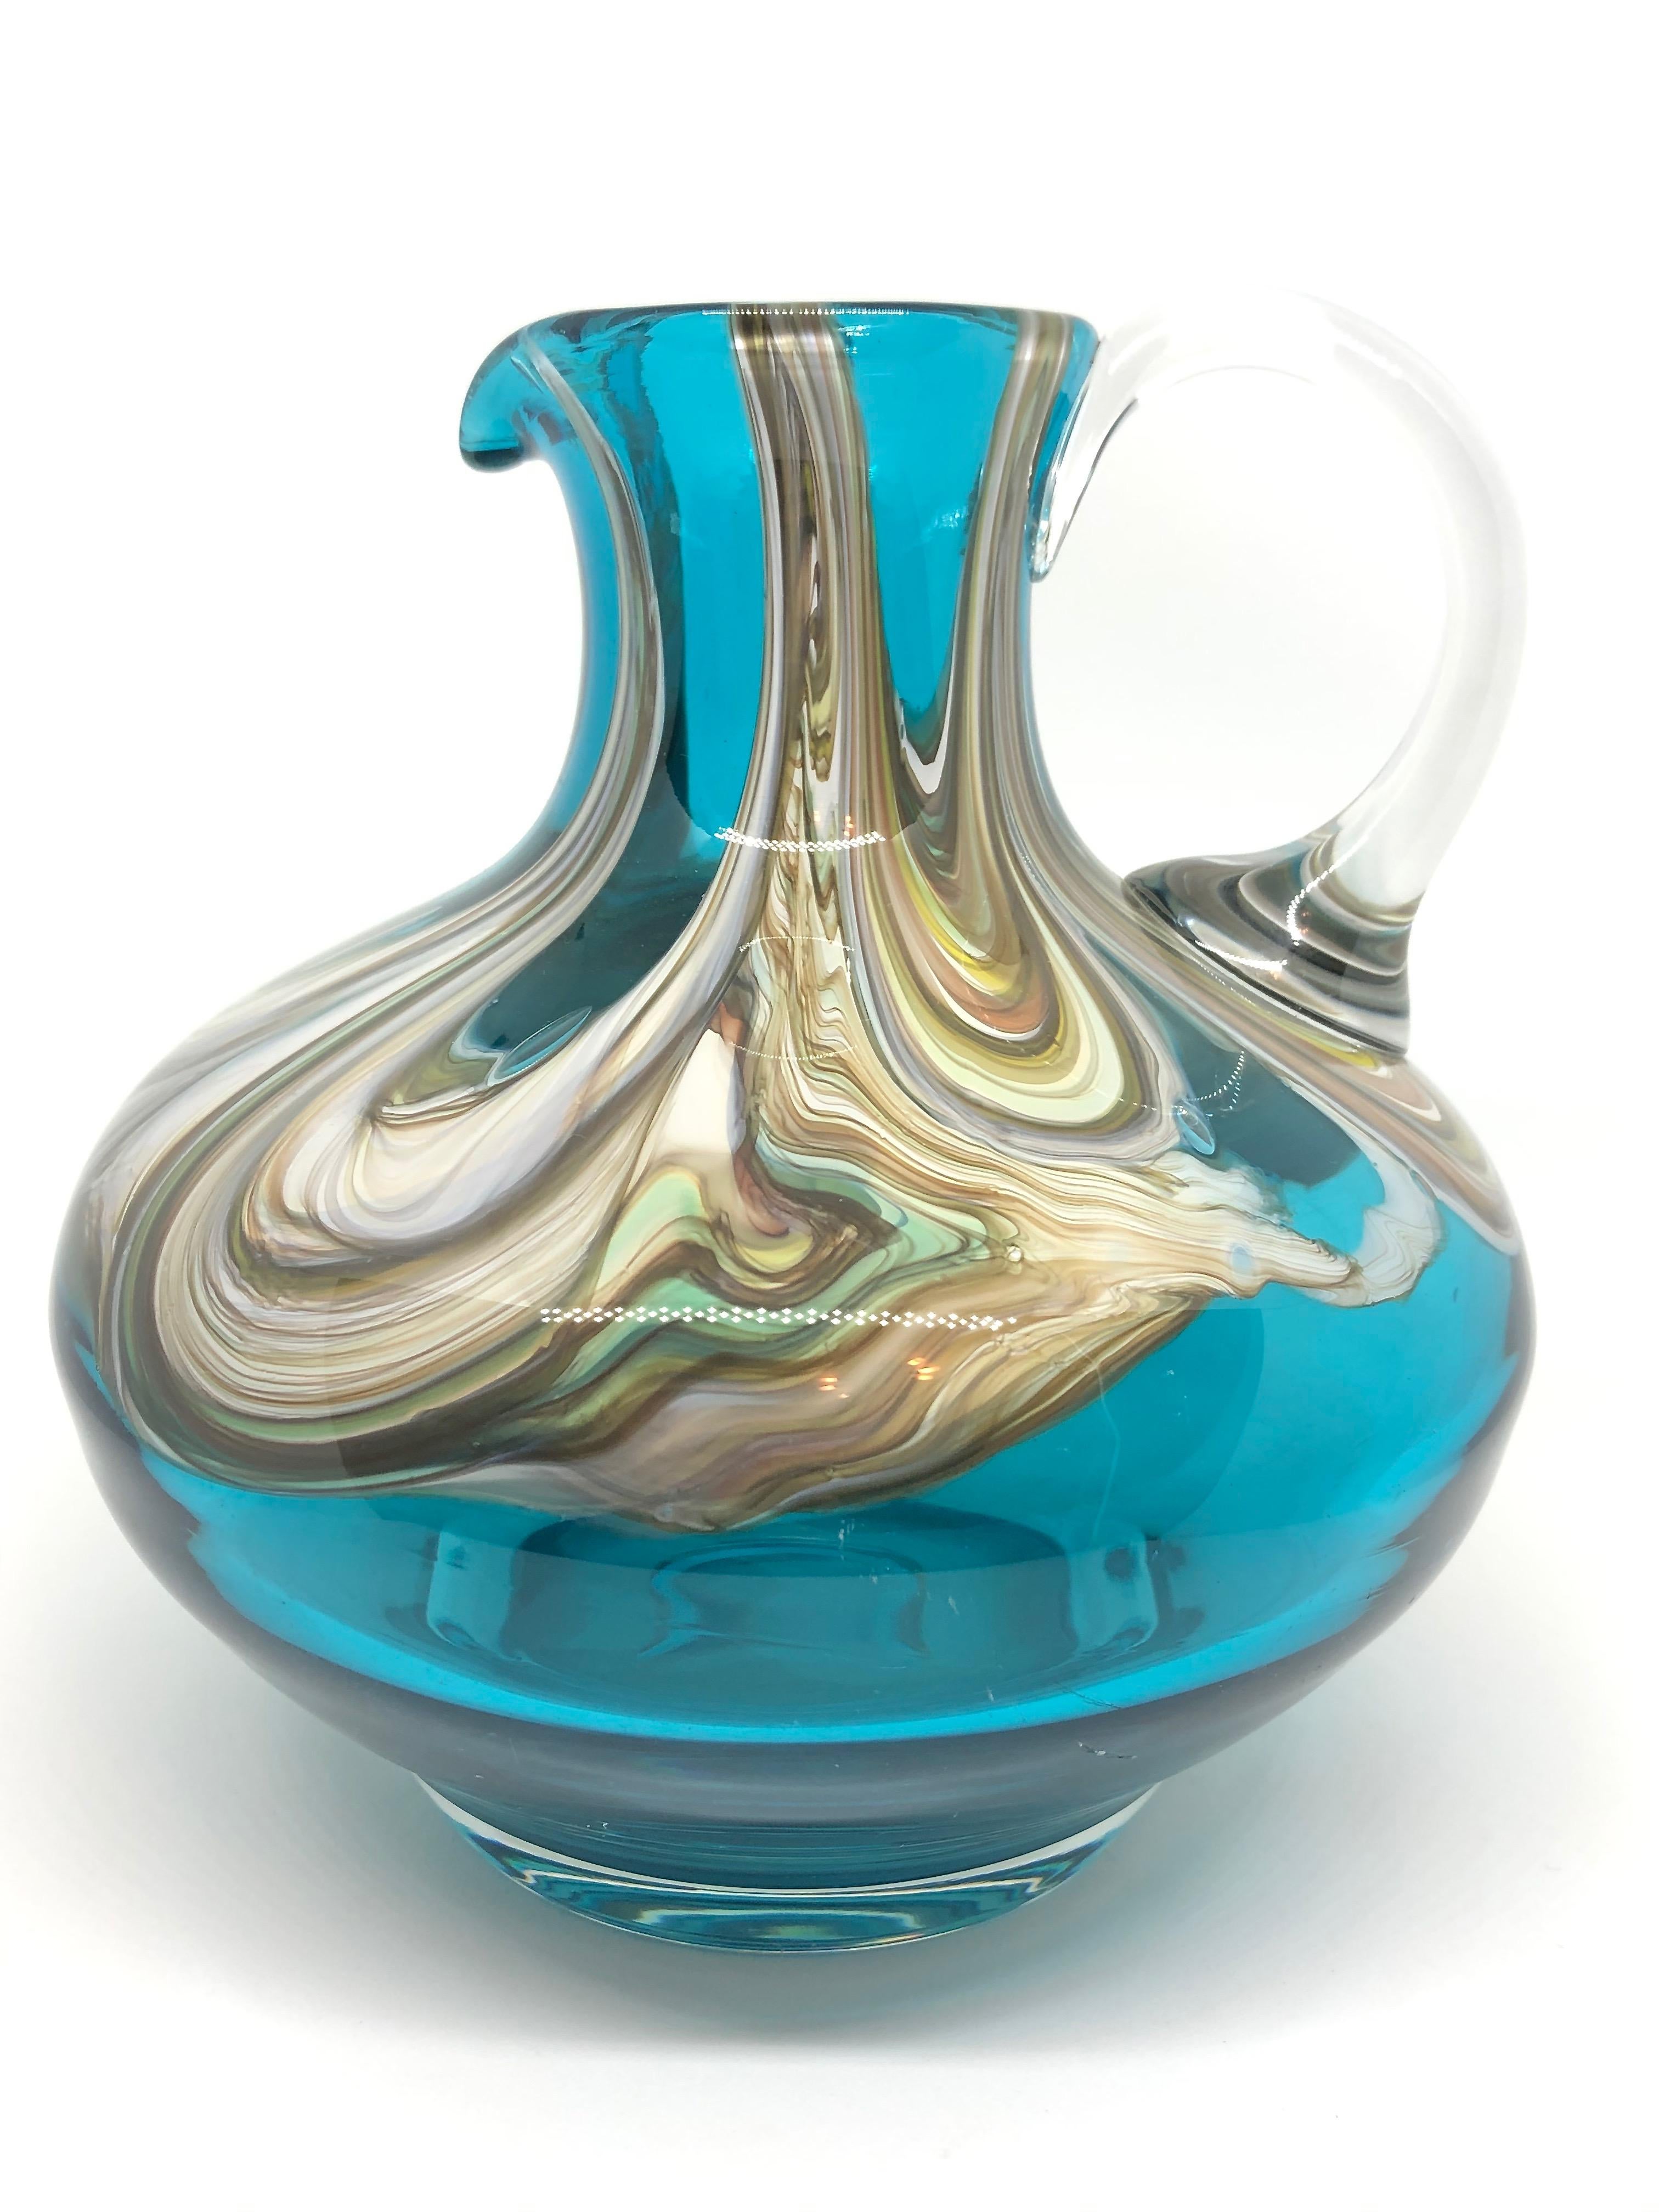 Beautiful Murano hand blown Italian art glass vase. Created by a Murano glass company. A beautiful piece of art for any room.